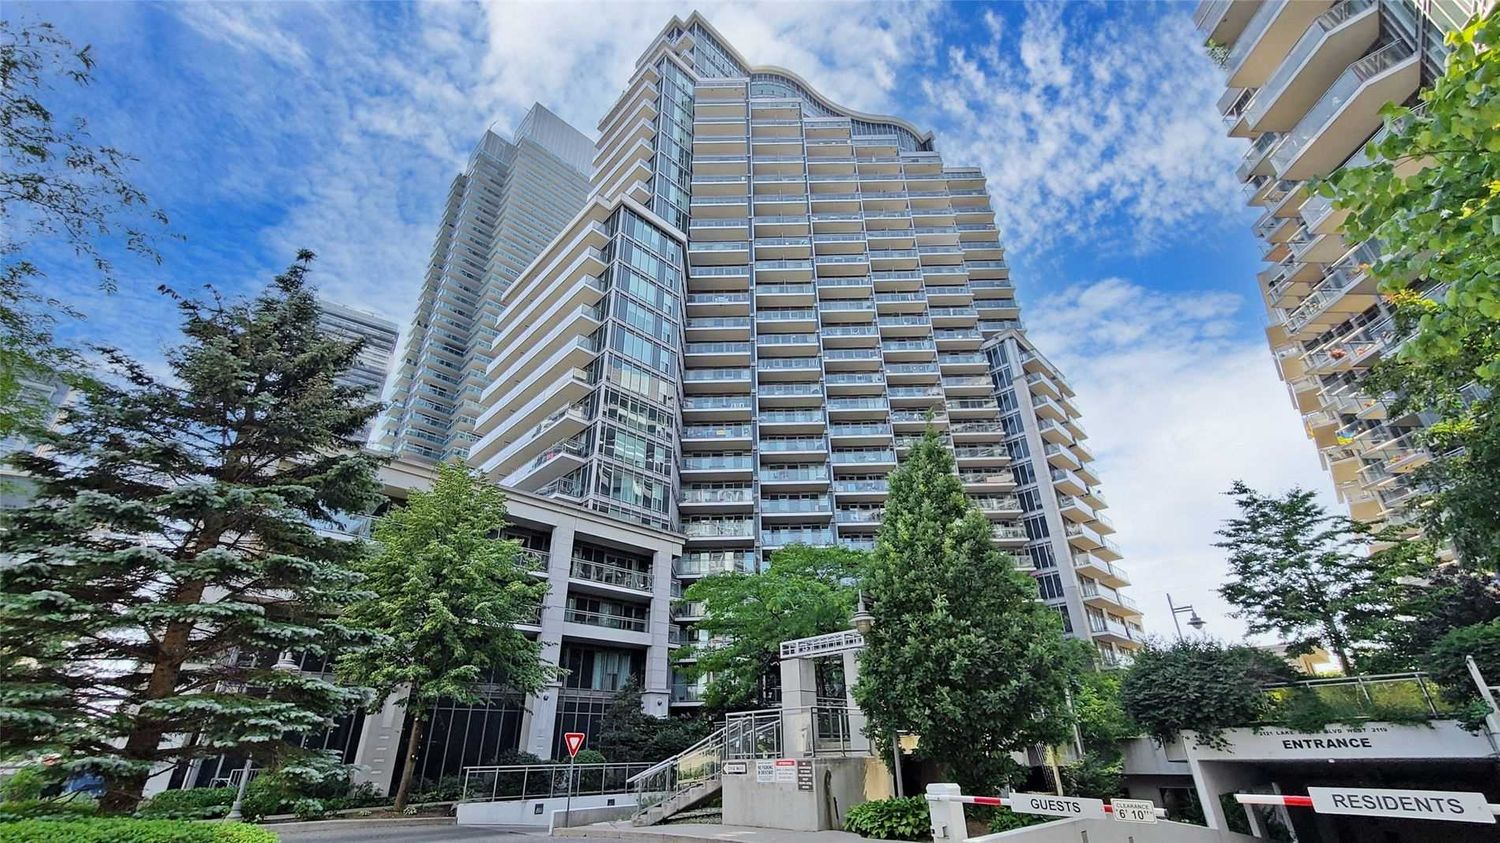 2121 Lake Shore Boulevard W. Voyager I at Waterview Condos is located in  Etobicoke, Toronto - image #2 of 13